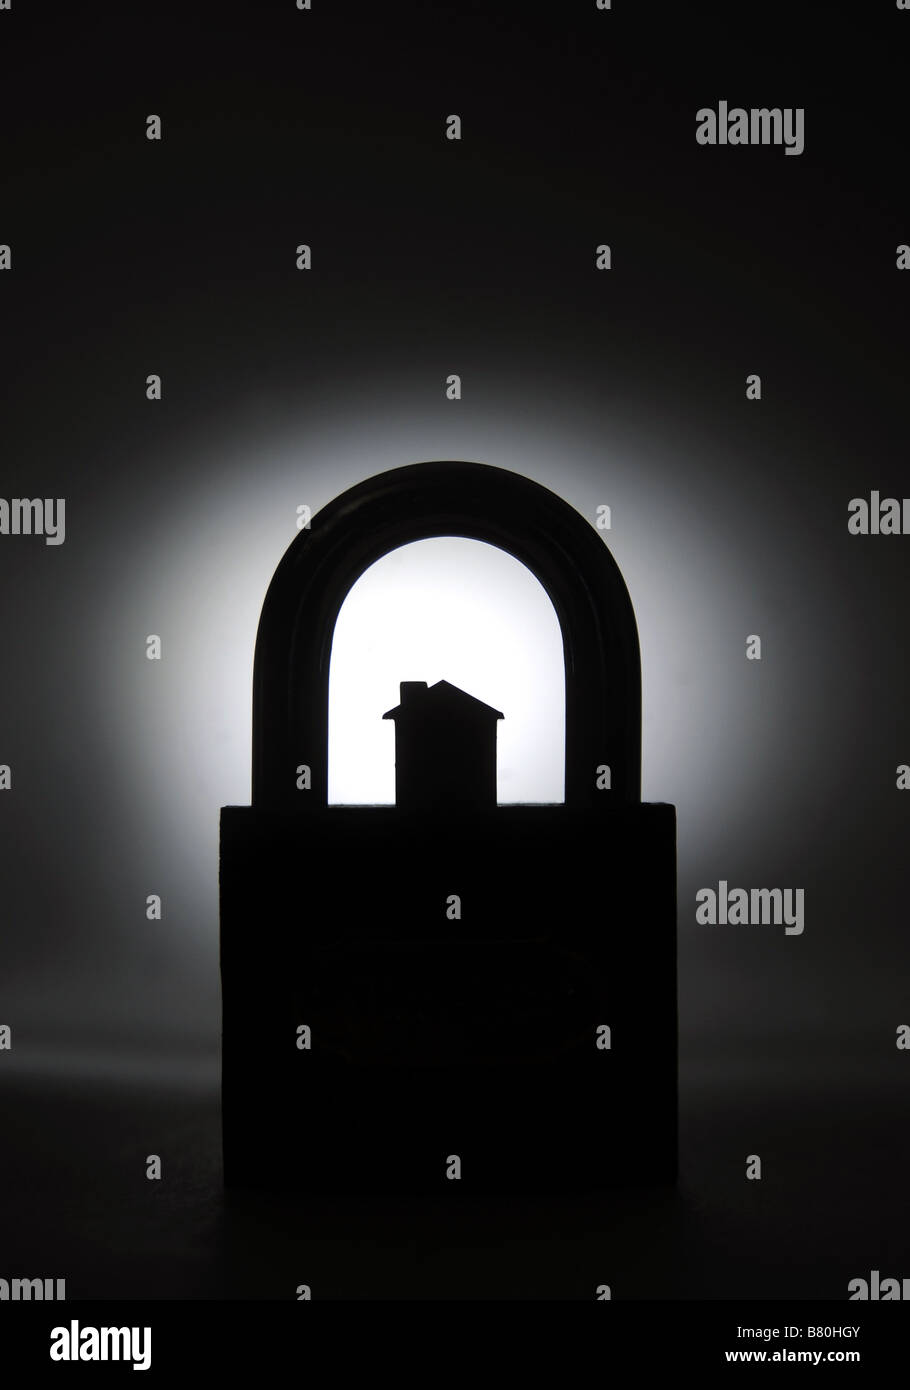 SMALL HOUSE PROTECTED BY PADLOCK Stock Photo